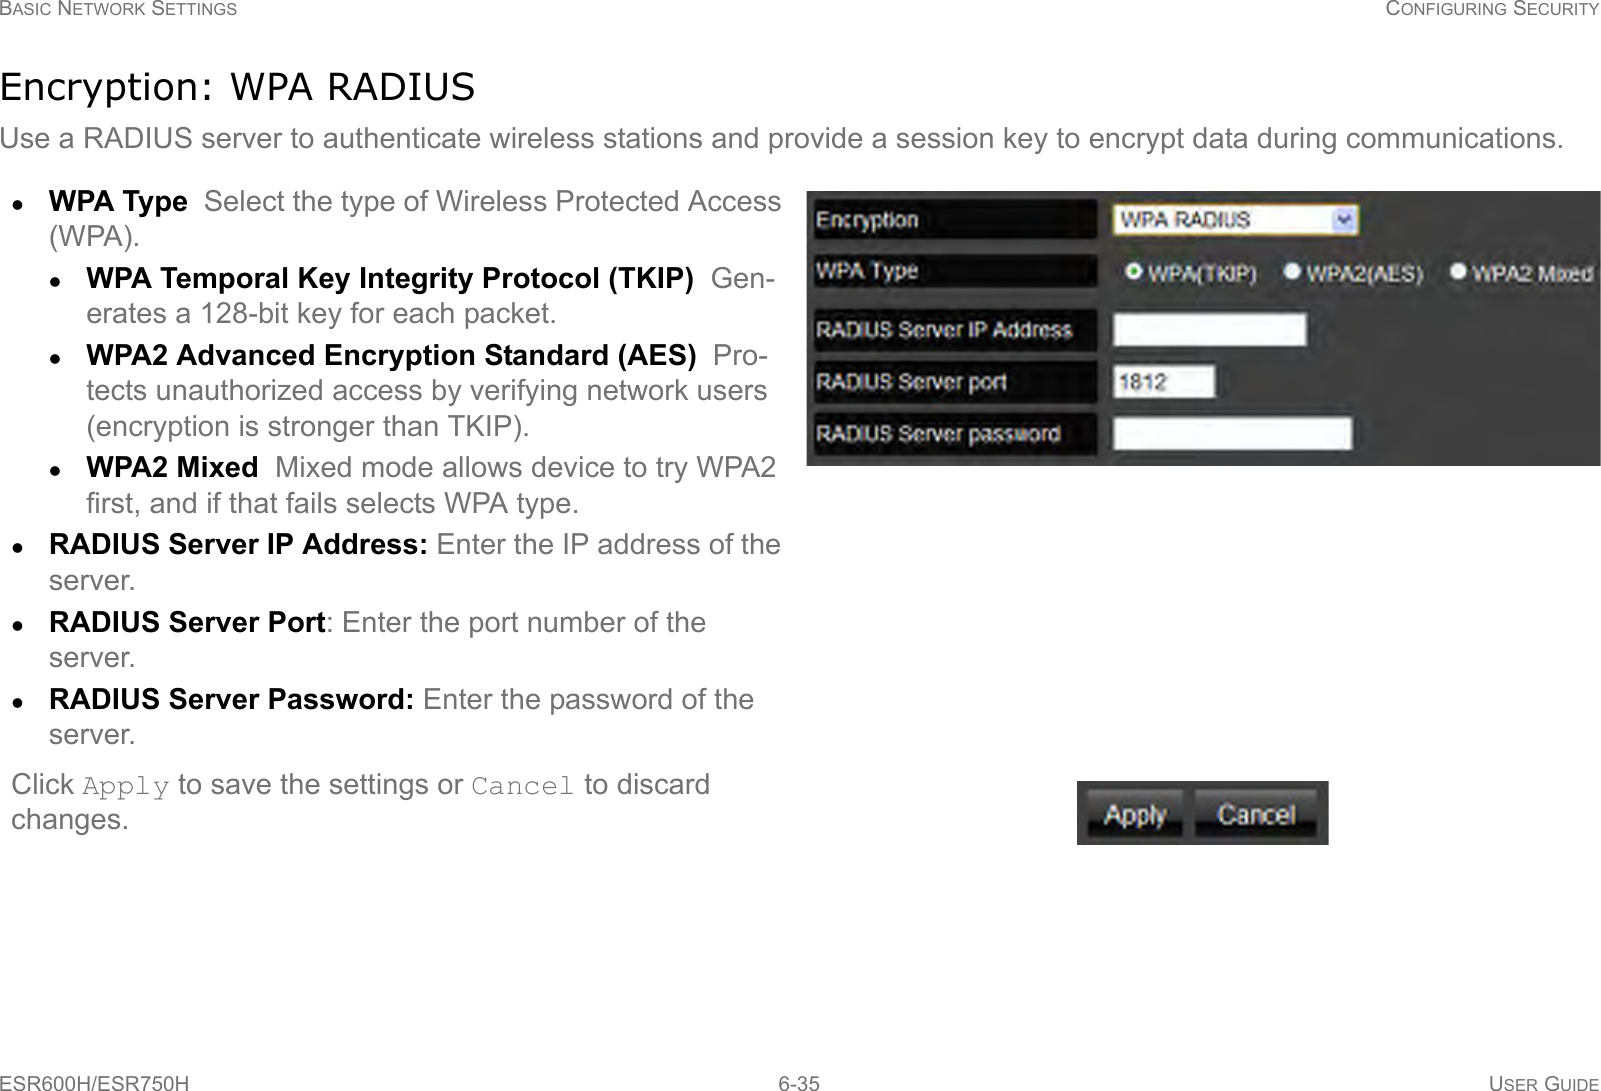 BASIC NETWORK SETTINGS CONFIGURING SECURITYESR600H/ESR750H 6-35 USER GUIDEEncryption: WPA RADIUSUse a RADIUS server to authenticate wireless stations and provide a session key to encrypt data during communications.WPA Type  Select the type of Wireless Protected Access (WPA). WPA Temporal Key Integrity Protocol (TKIP)  Gen-erates a 128-bit key for each packet.WPA2 Advanced Encryption Standard (AES)  Pro-tects unauthorized access by verifying network users (encryption is stronger than TKIP).WPA2 Mixed  Mixed mode allows device to try WPA2 first, and if that fails selects WPA type.RADIUS Server IP Address: Enter the IP address of the server.RADIUS Server Port: Enter the port number of the server.RADIUS Server Password: Enter the password of the server.Click Apply to save the settings or Cancel to discard changes.